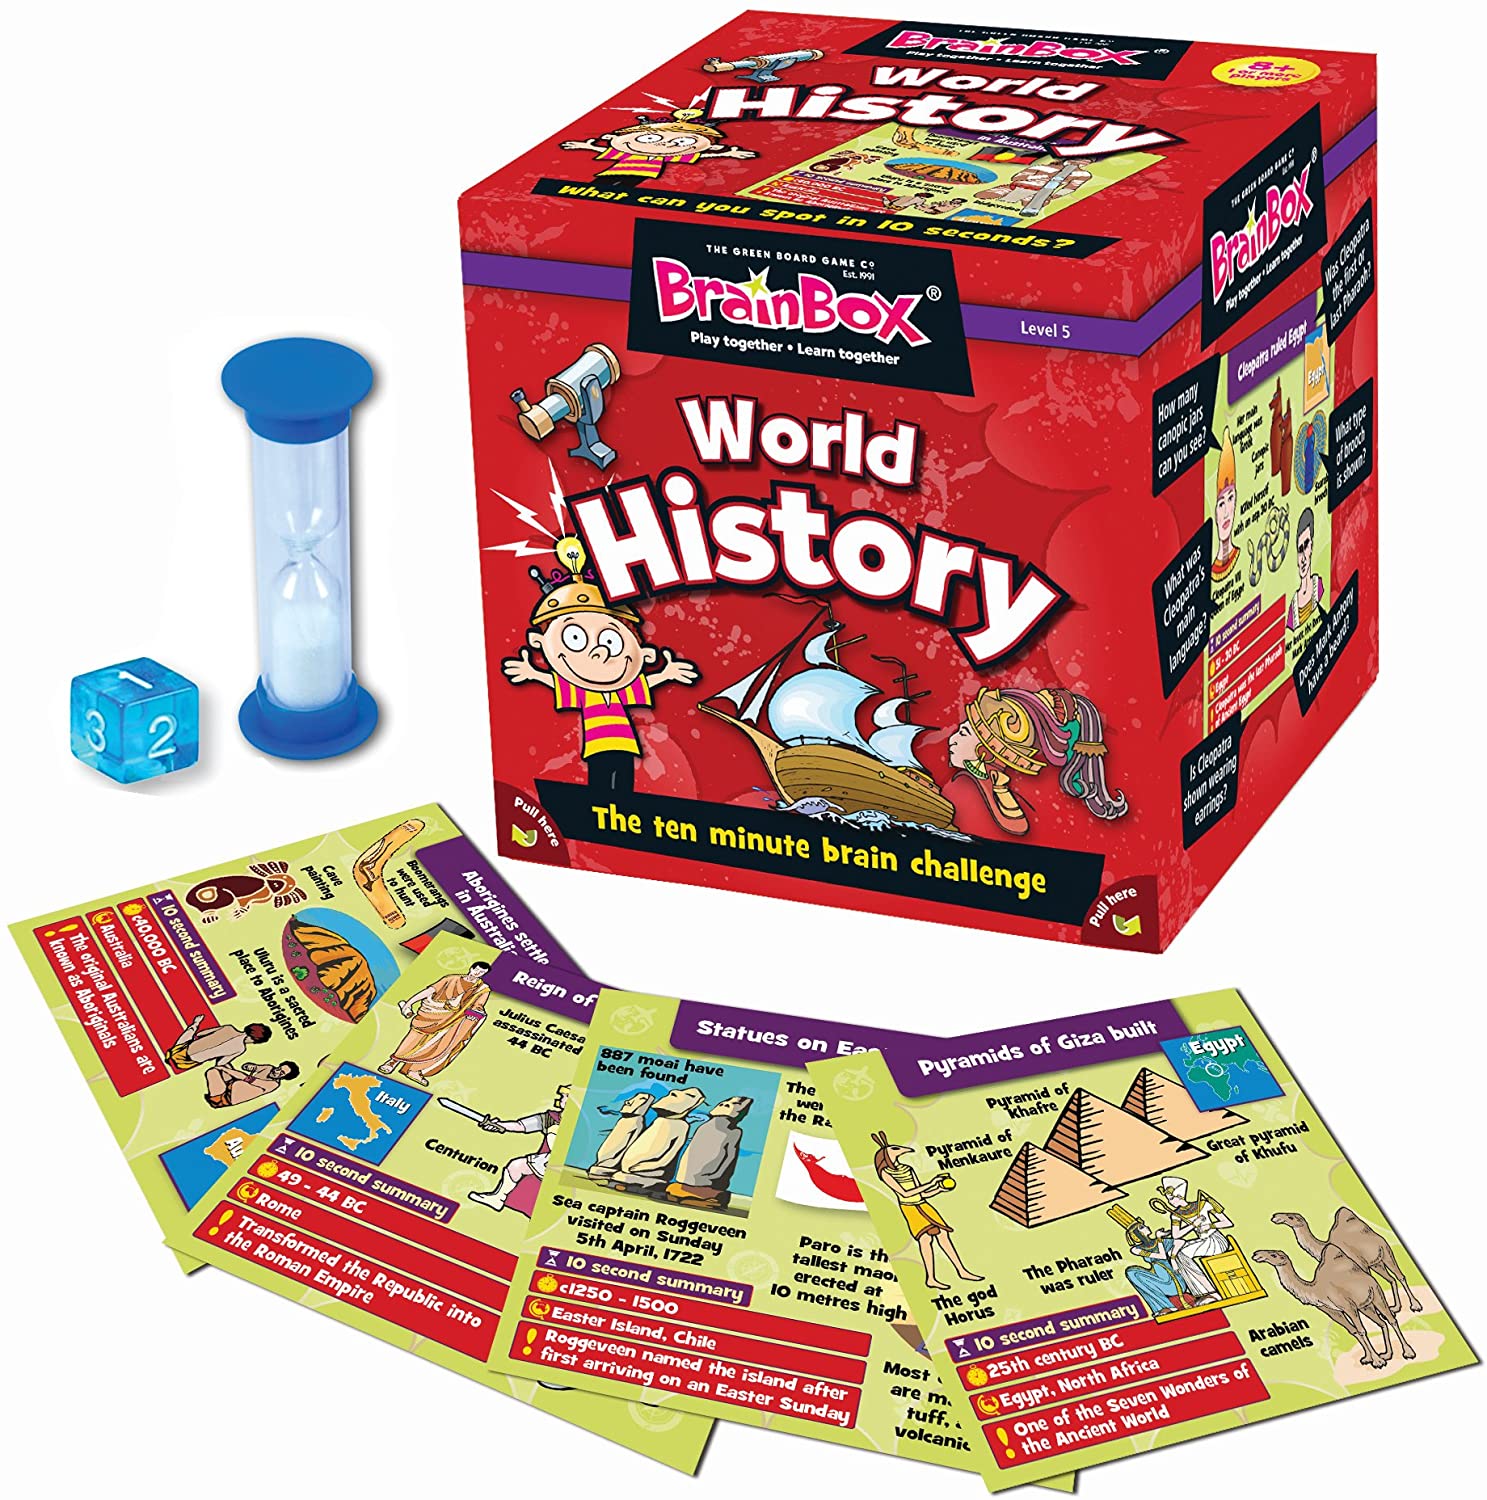 Our TOP Five… History Books (for kids) - BrainBox - World History by The Green Board Game Co.